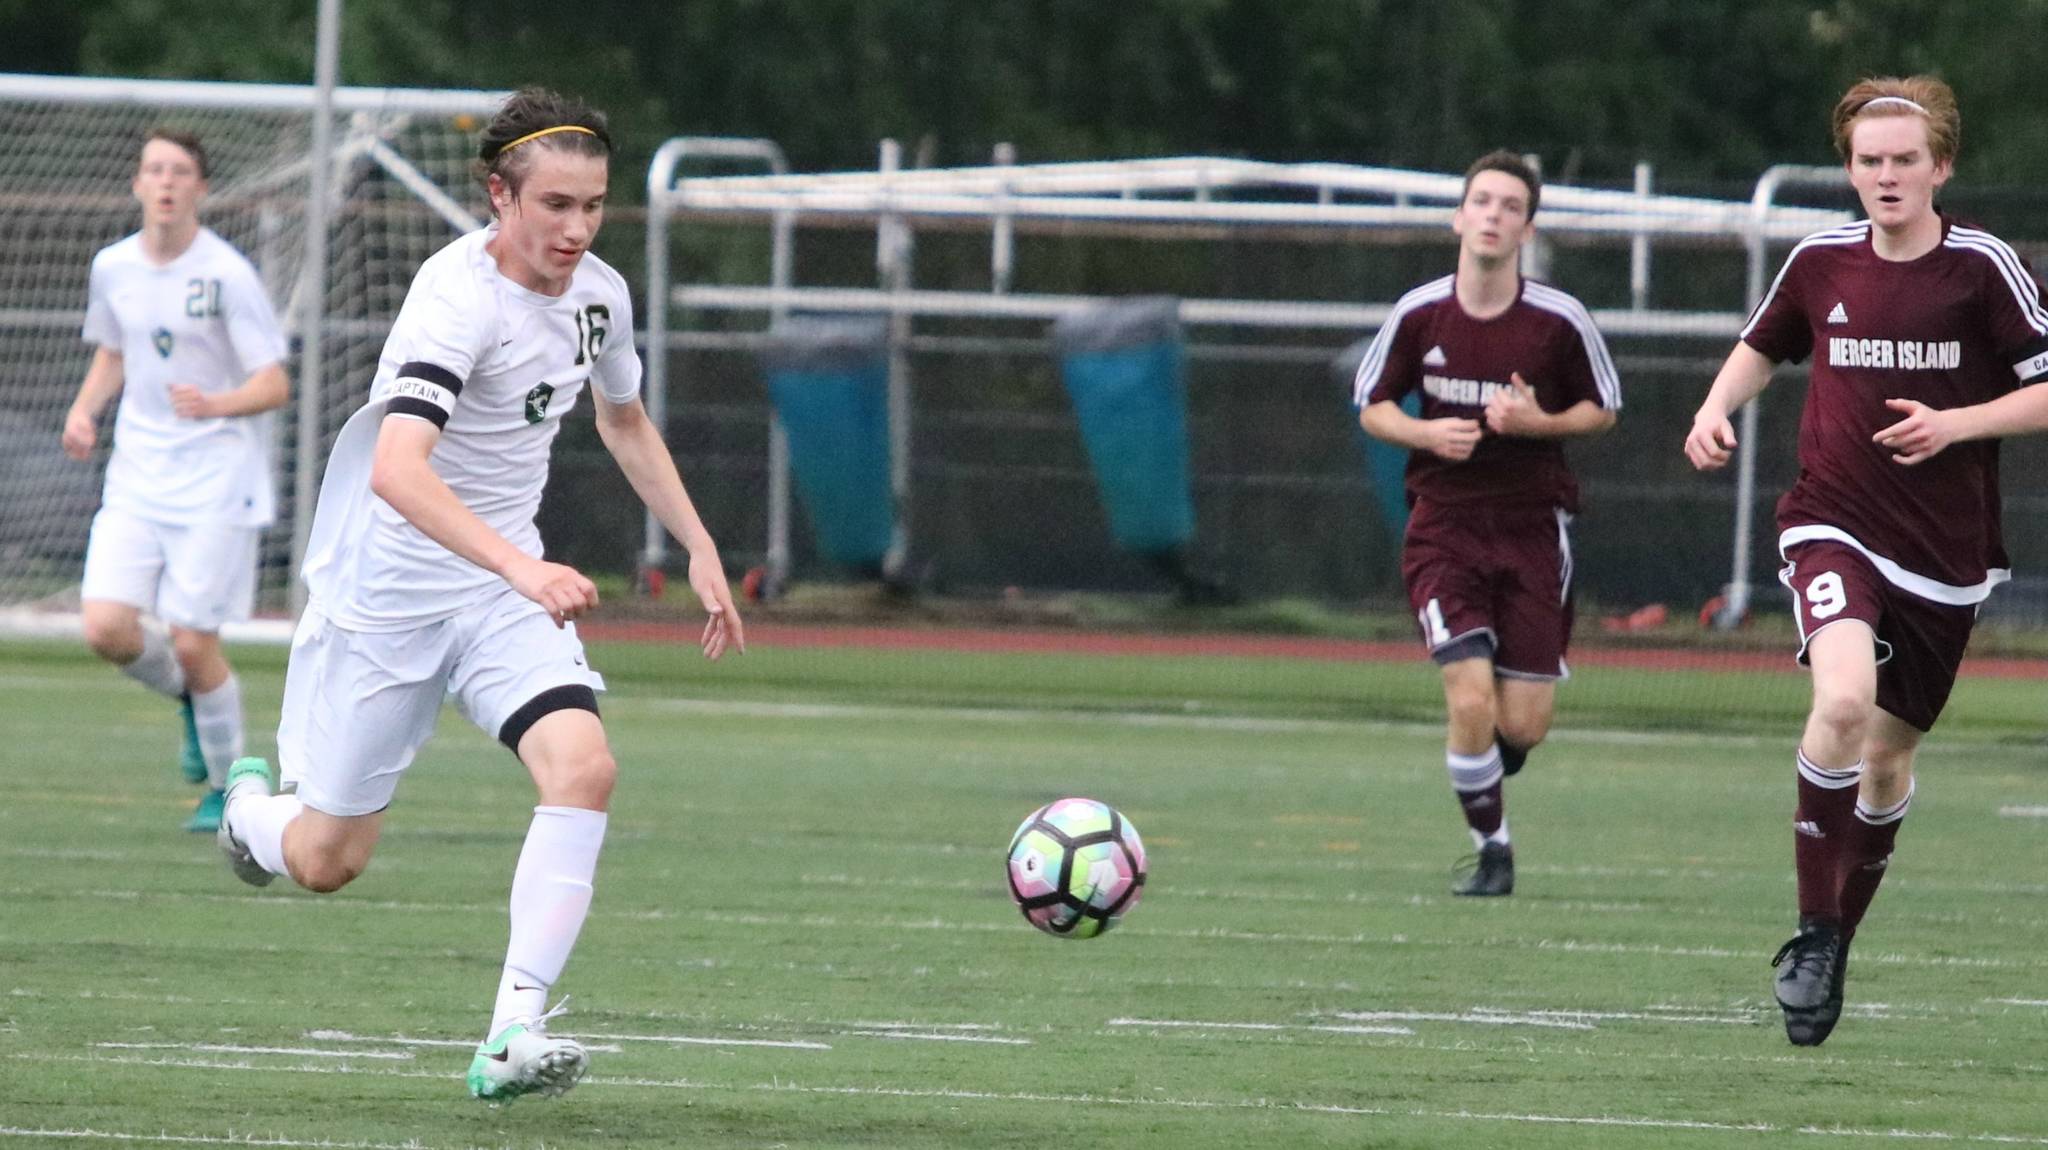 Mustang midfielder Jacen Stein races up field. Andy Nystrom / staff photo